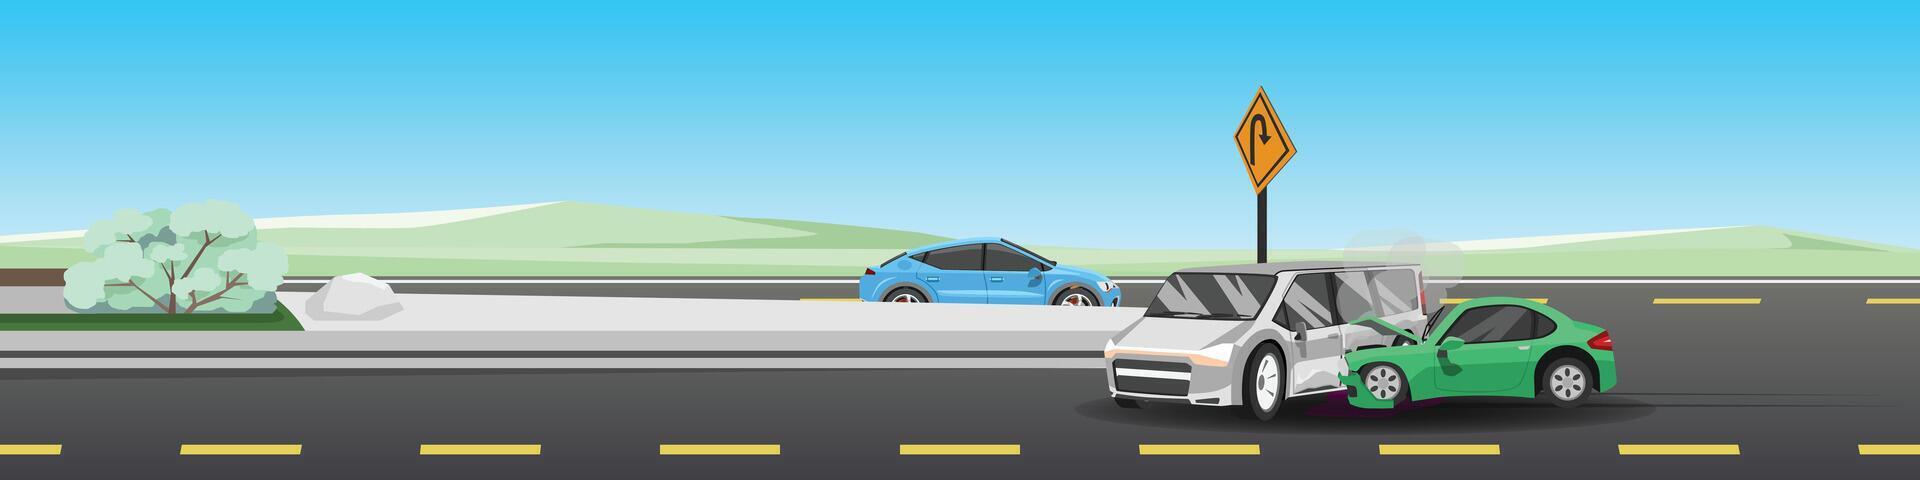 Vector or Illustrator of car accident on the asphalt road. Making a U-turn to cut directly in front of a car. Sport car crash to the middle of the van.